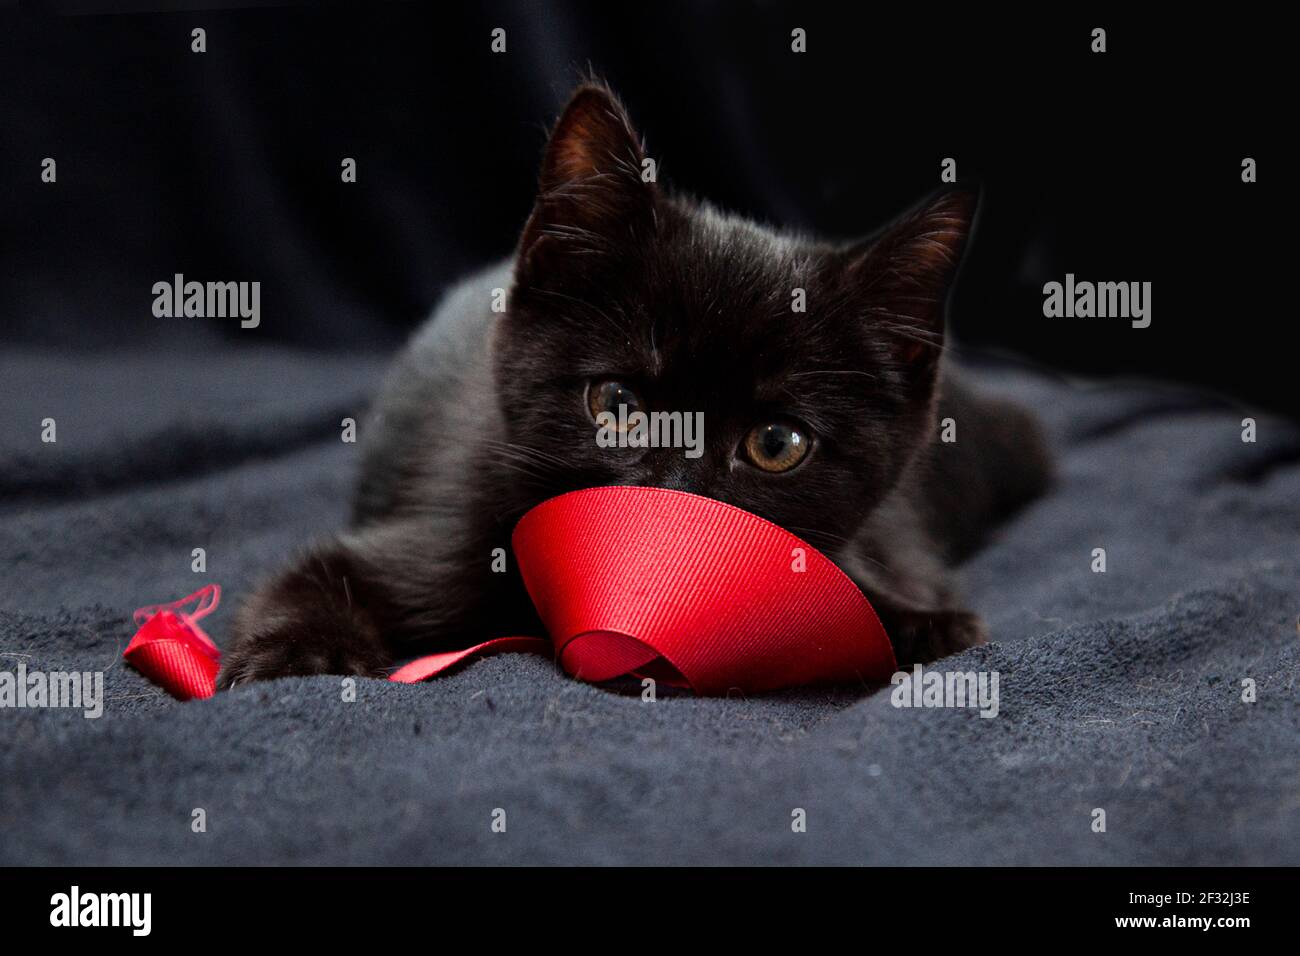 A black kitten peeking at you over a red ribbon Stock Photo